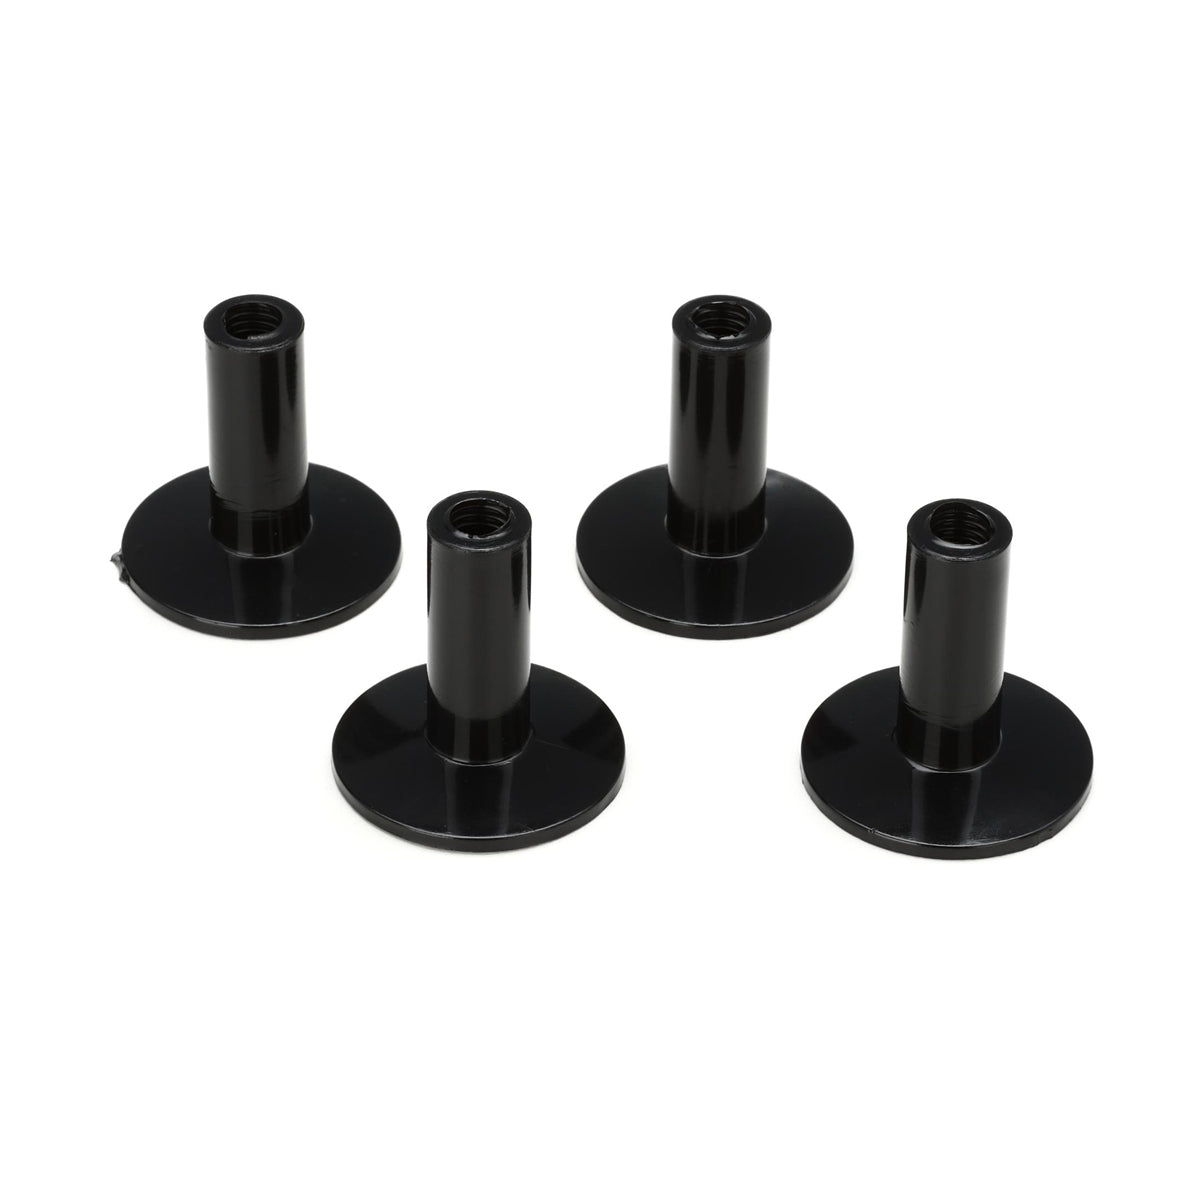 Gibraltar SC-19A 8mm ABS Long Cymbal Stand Tilter Sleeve and Seat 4 Pack